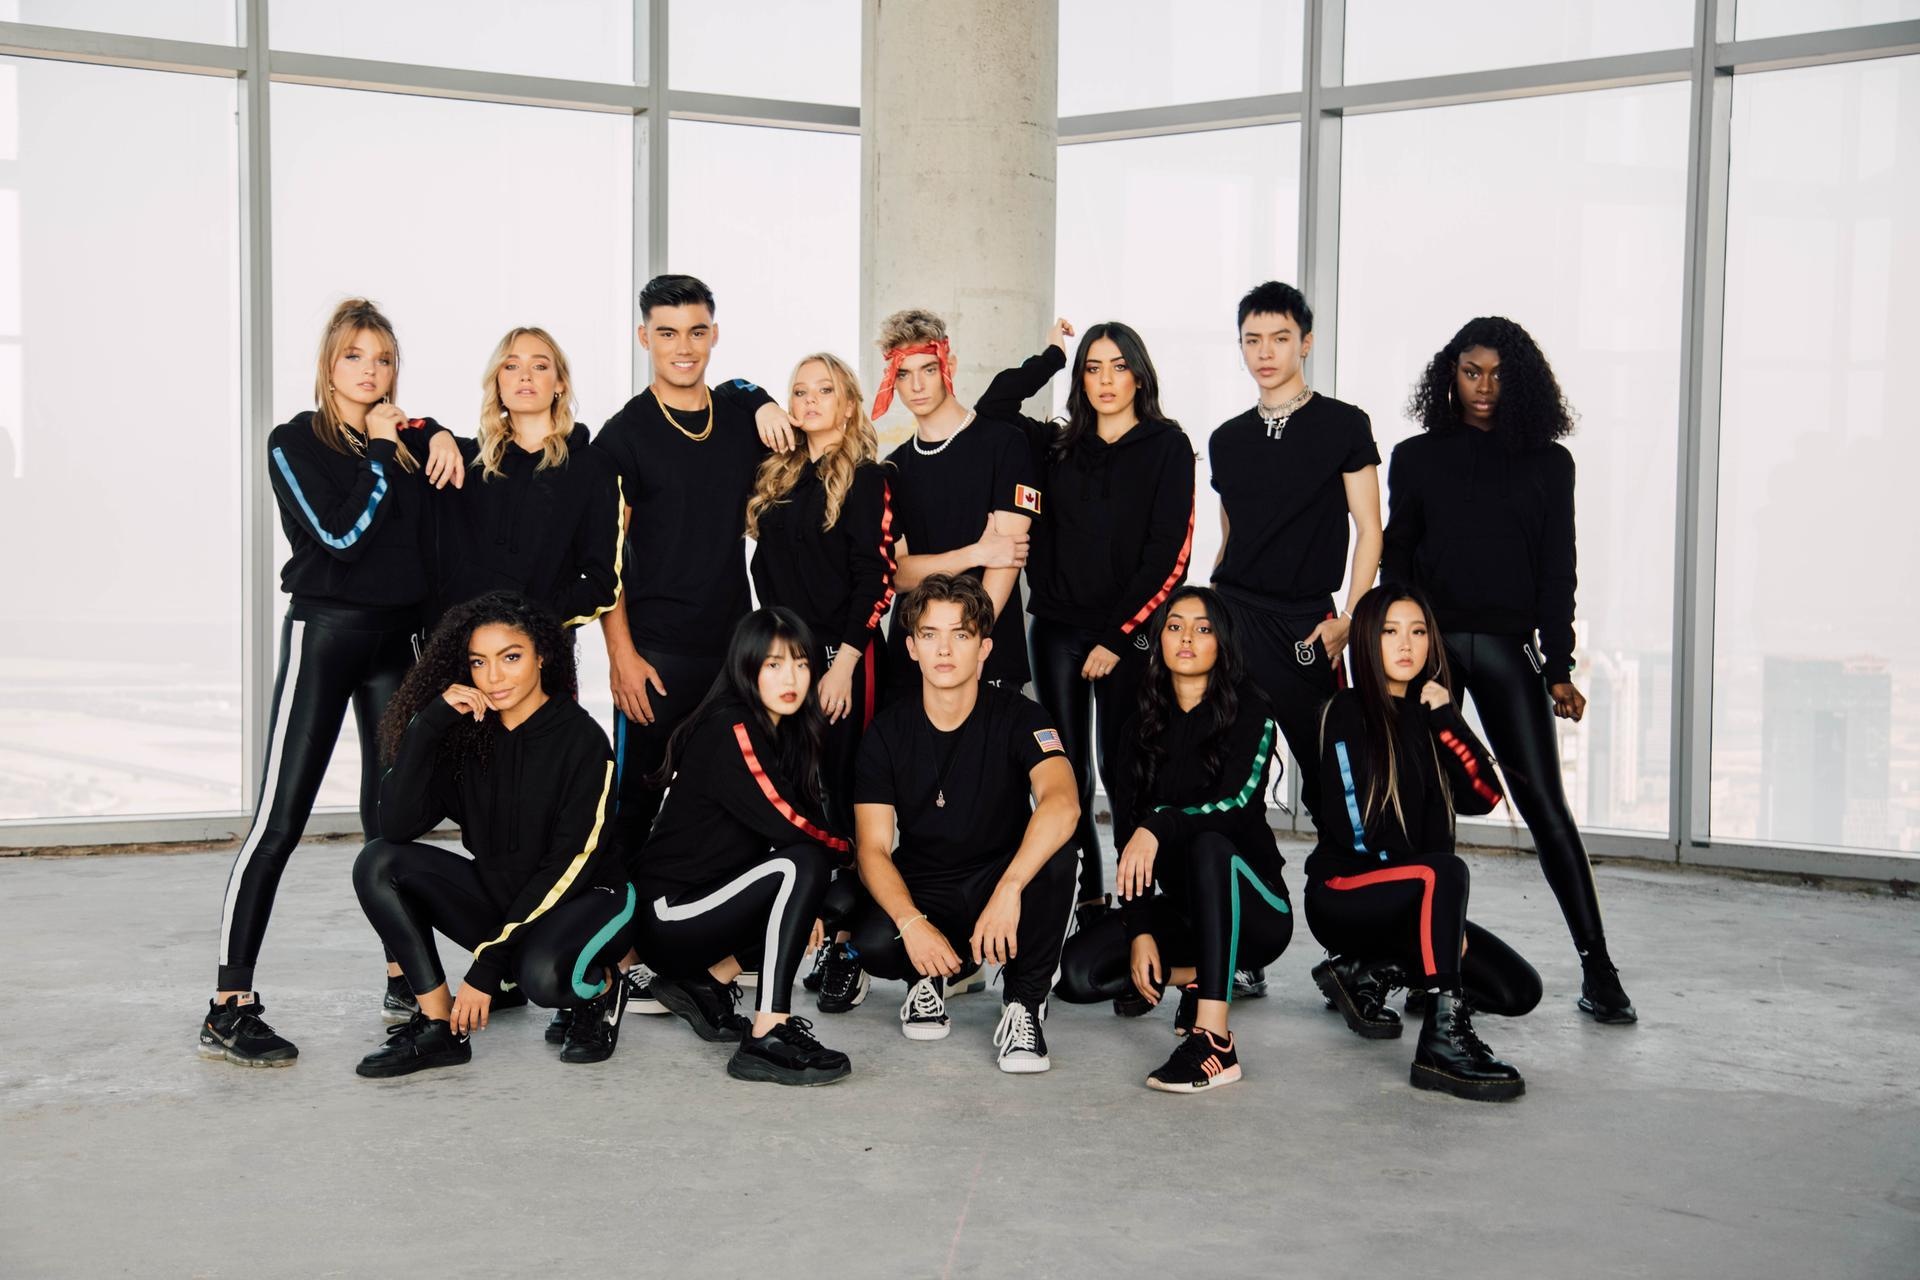 Now United, Final auditions, Middle East/North Africa, Global pop group, 1920x1280 HD Desktop